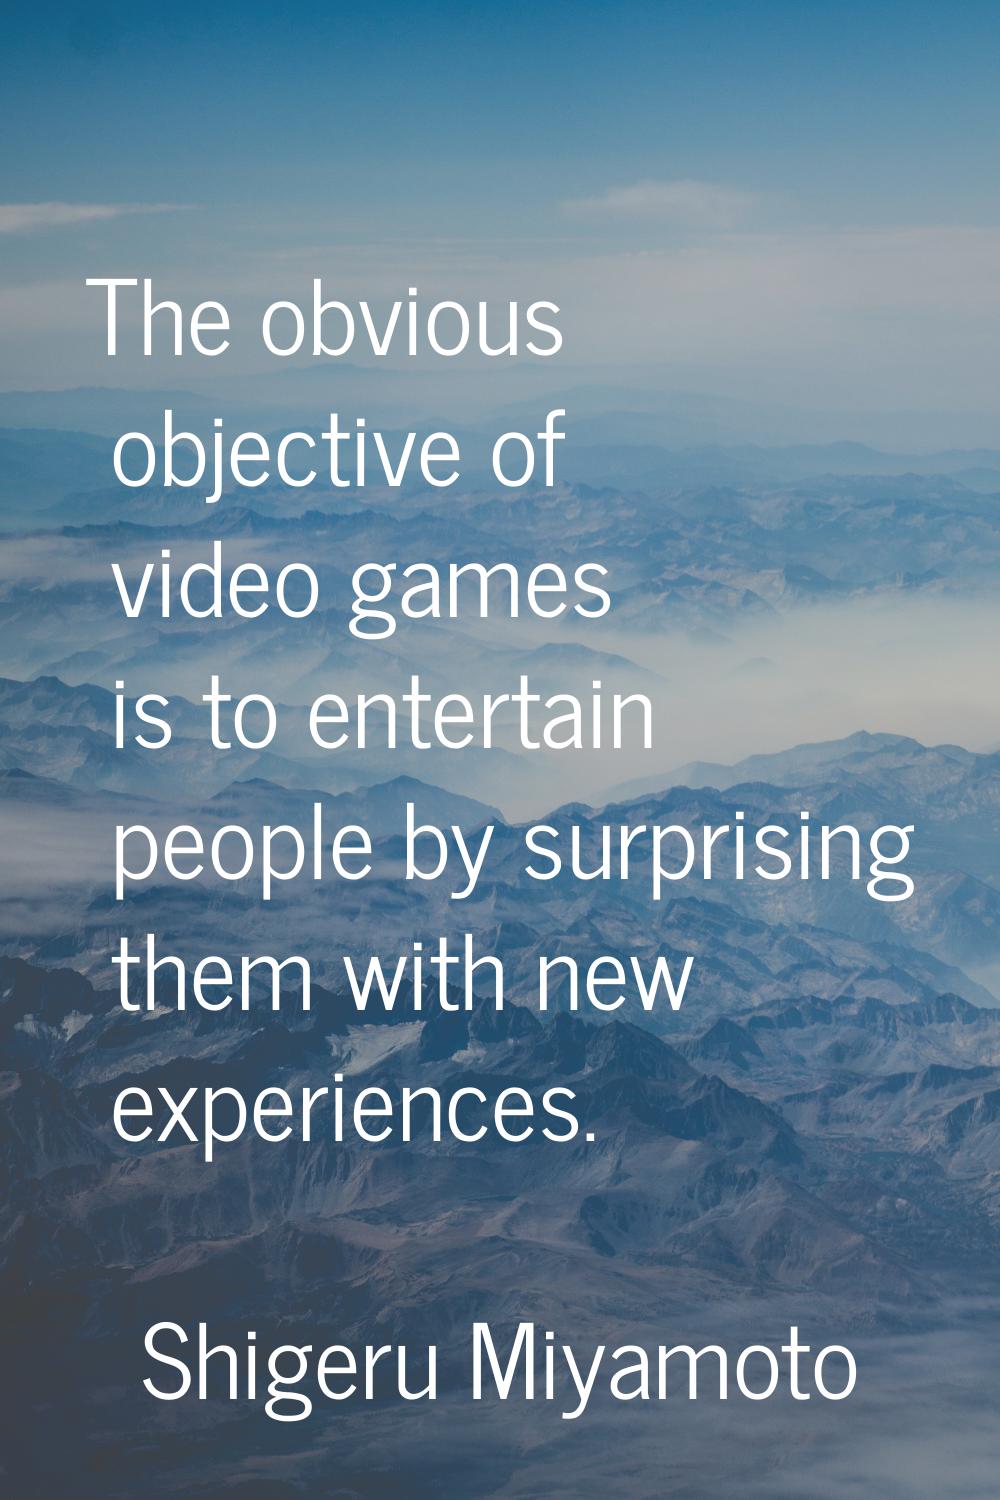 The obvious objective of video games is to entertain people by surprising them with new experiences